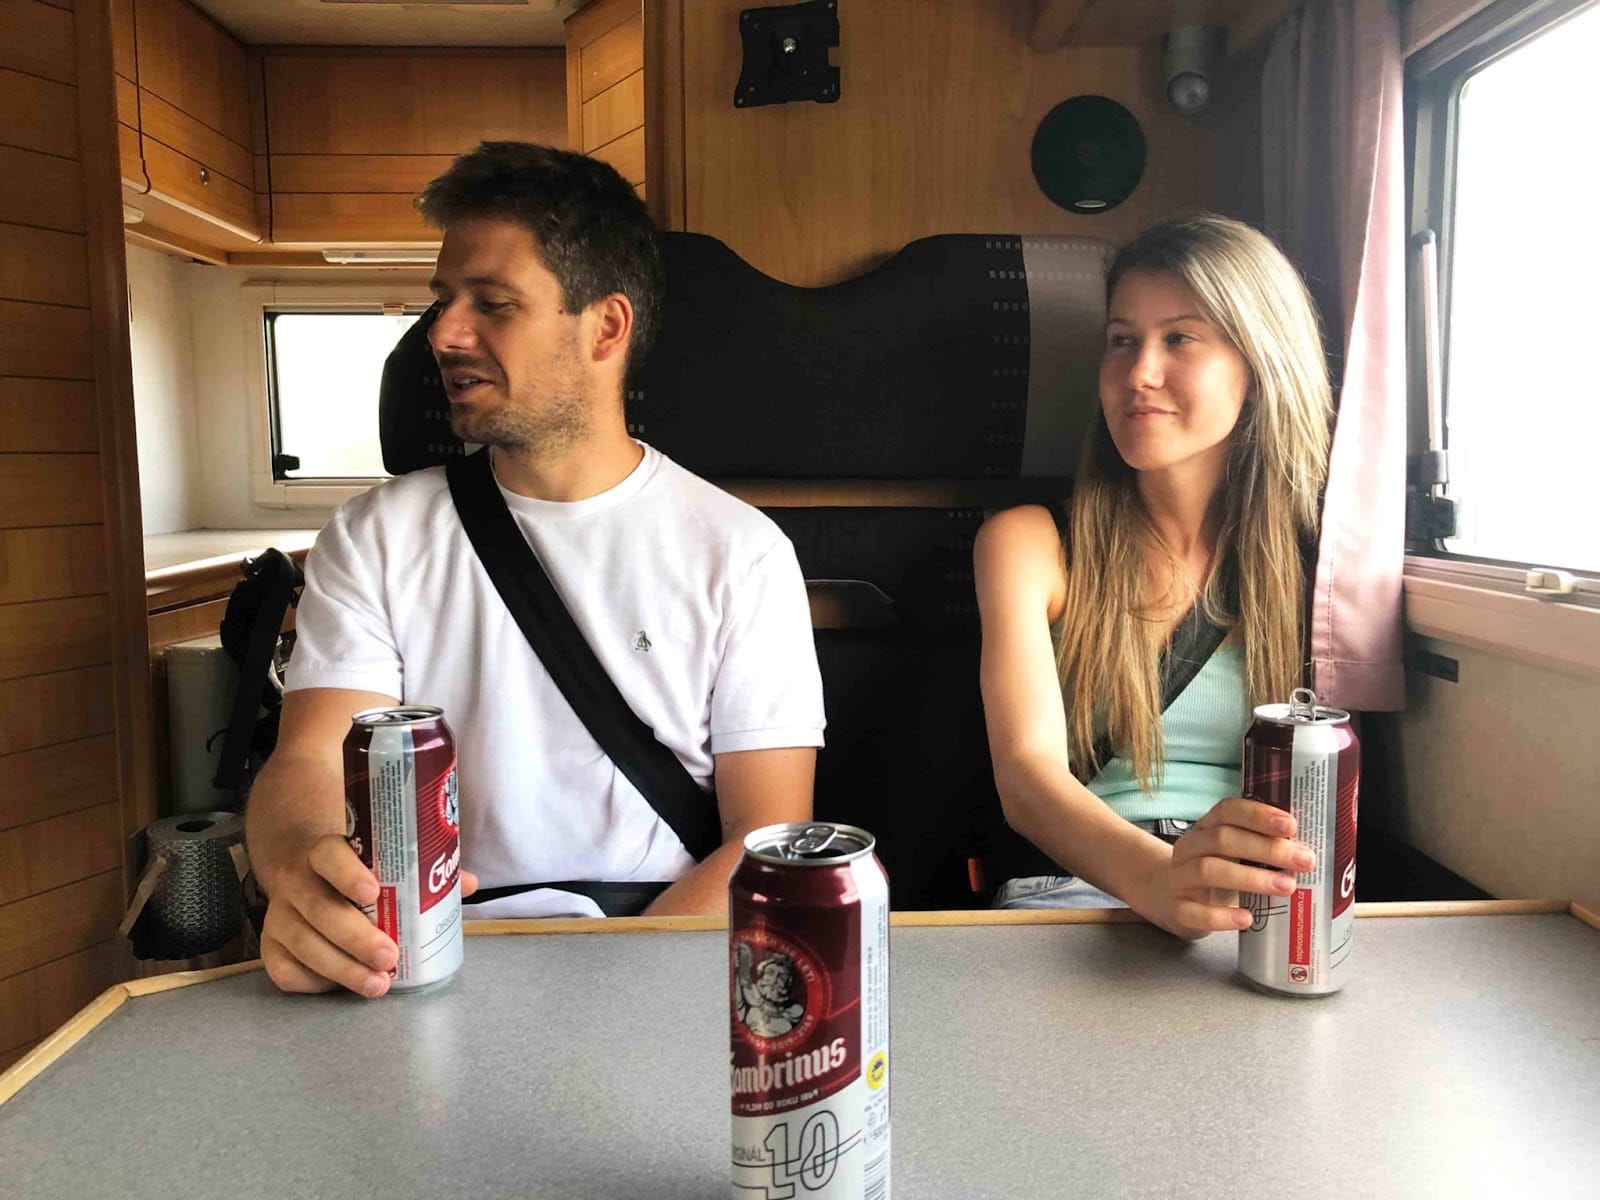 Spontaneous and fun: Apify co-founder Jakub hanging out with Jana on a company trip